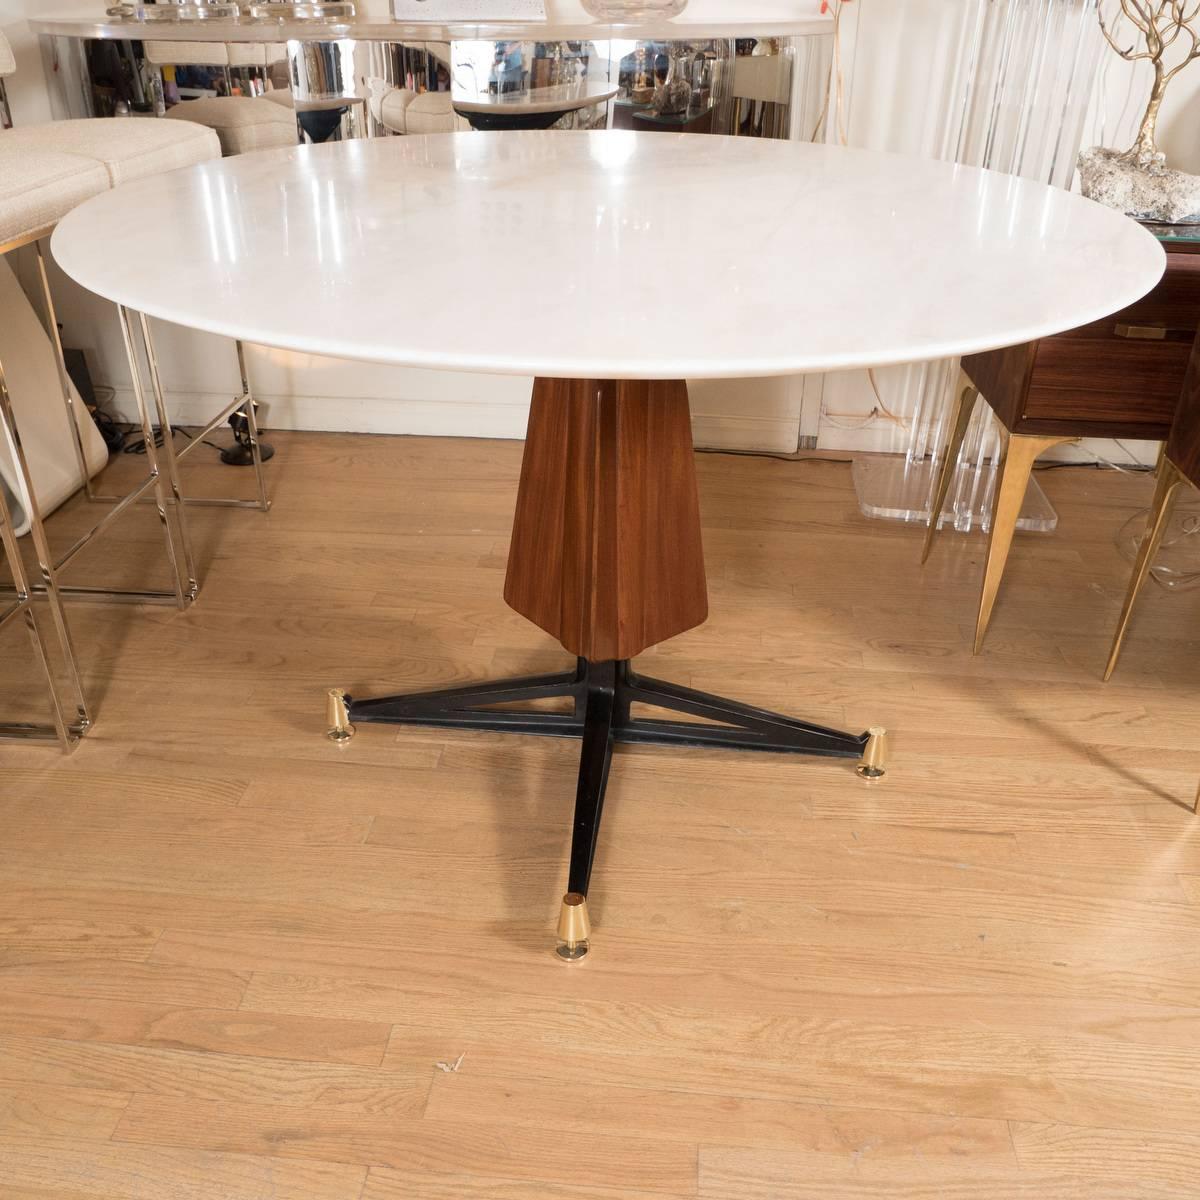 Circular marble table with blackened iron, brass, and wood base.